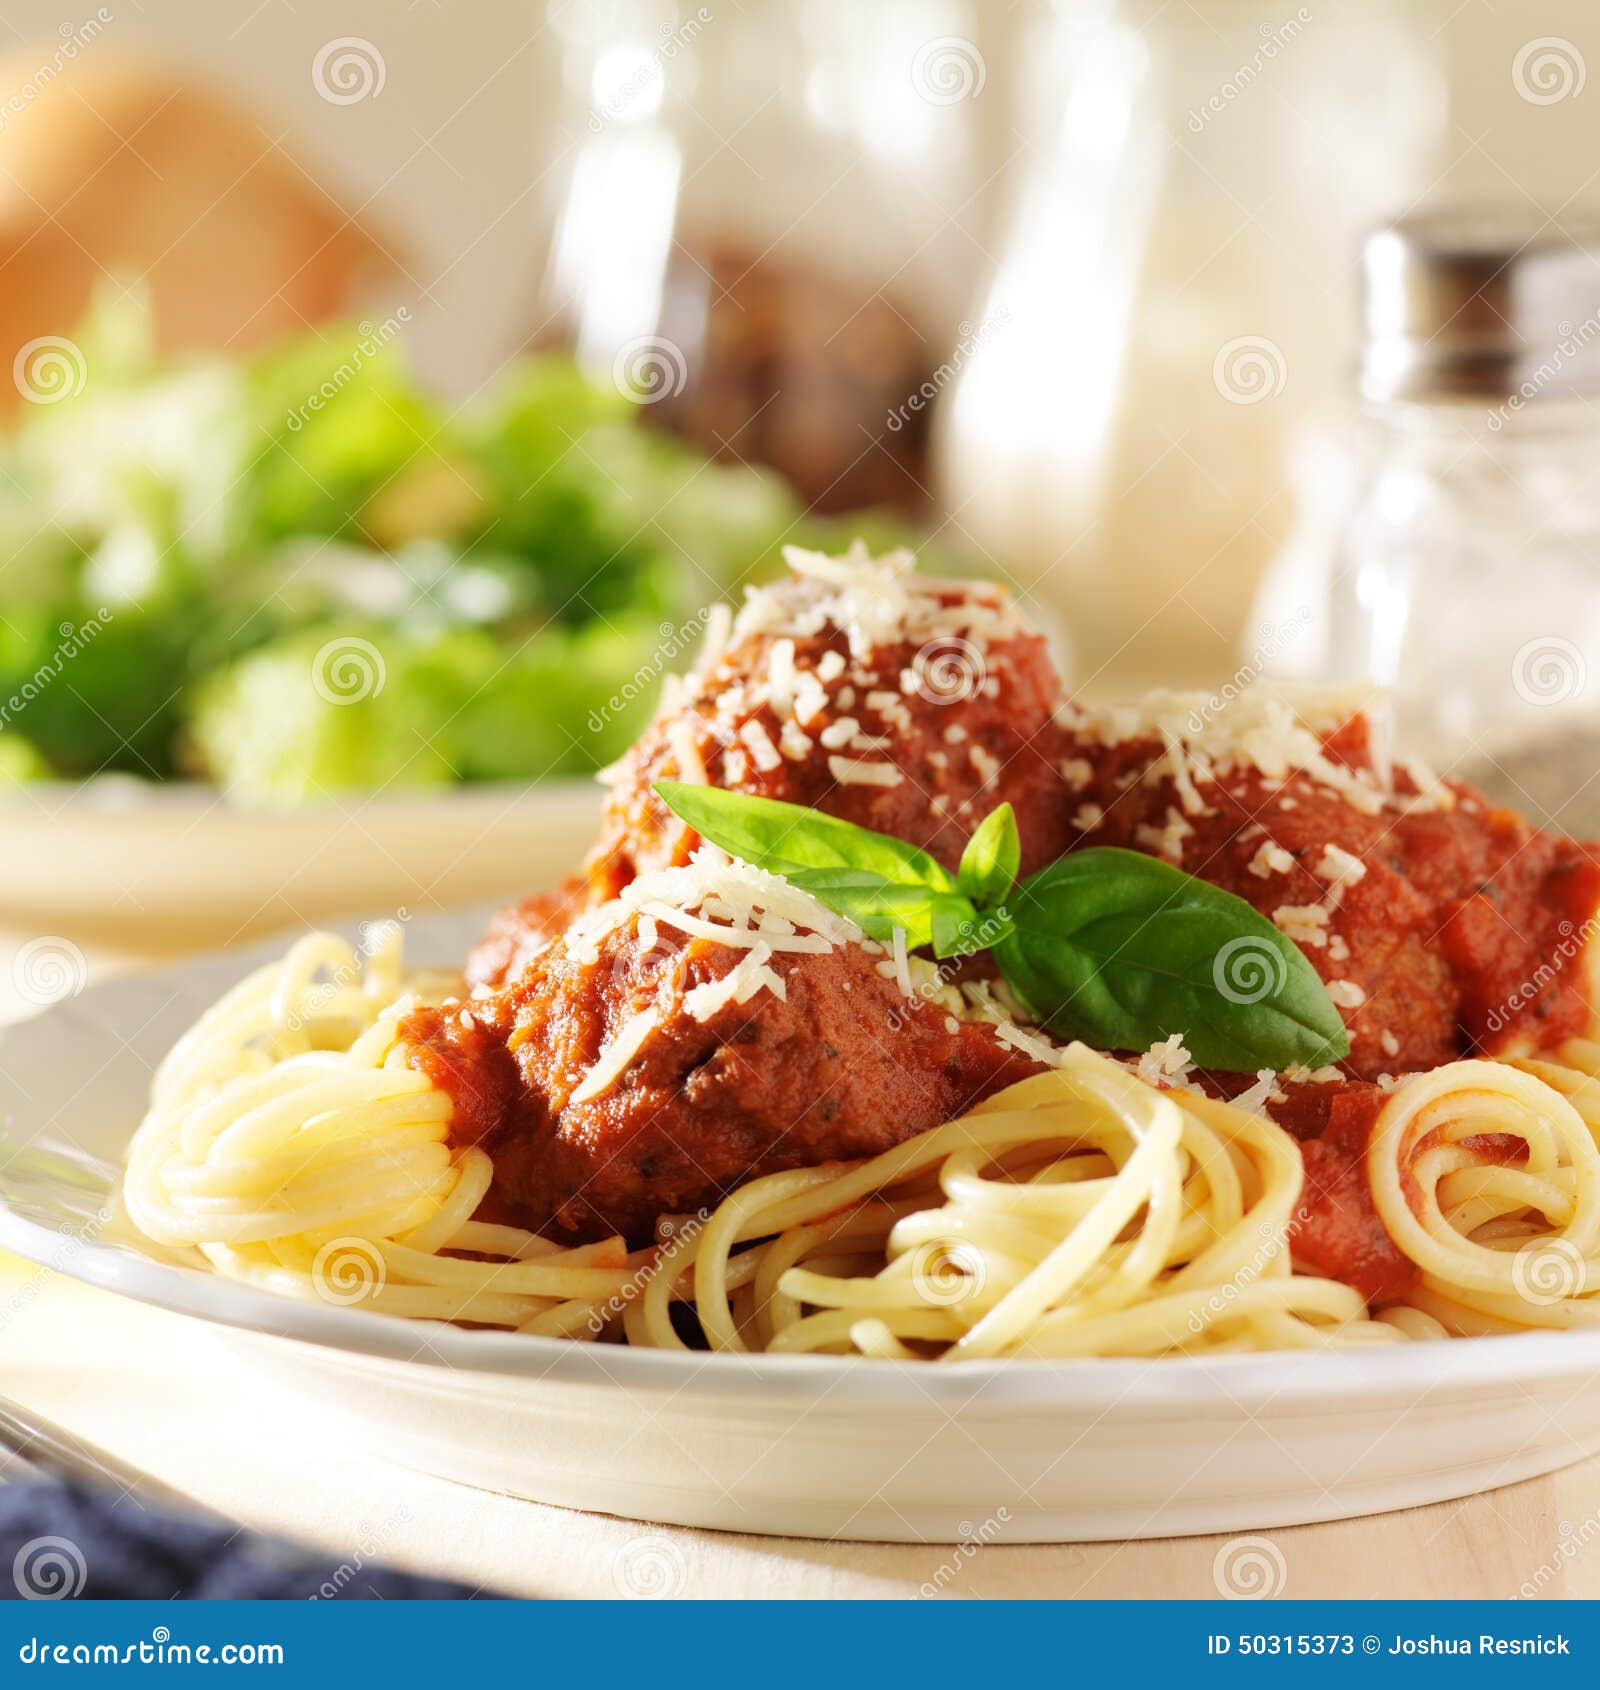 of meat composition 4 Plate Image Of Image:   Spaghetti 50315373 Meatballs Stock And Italian